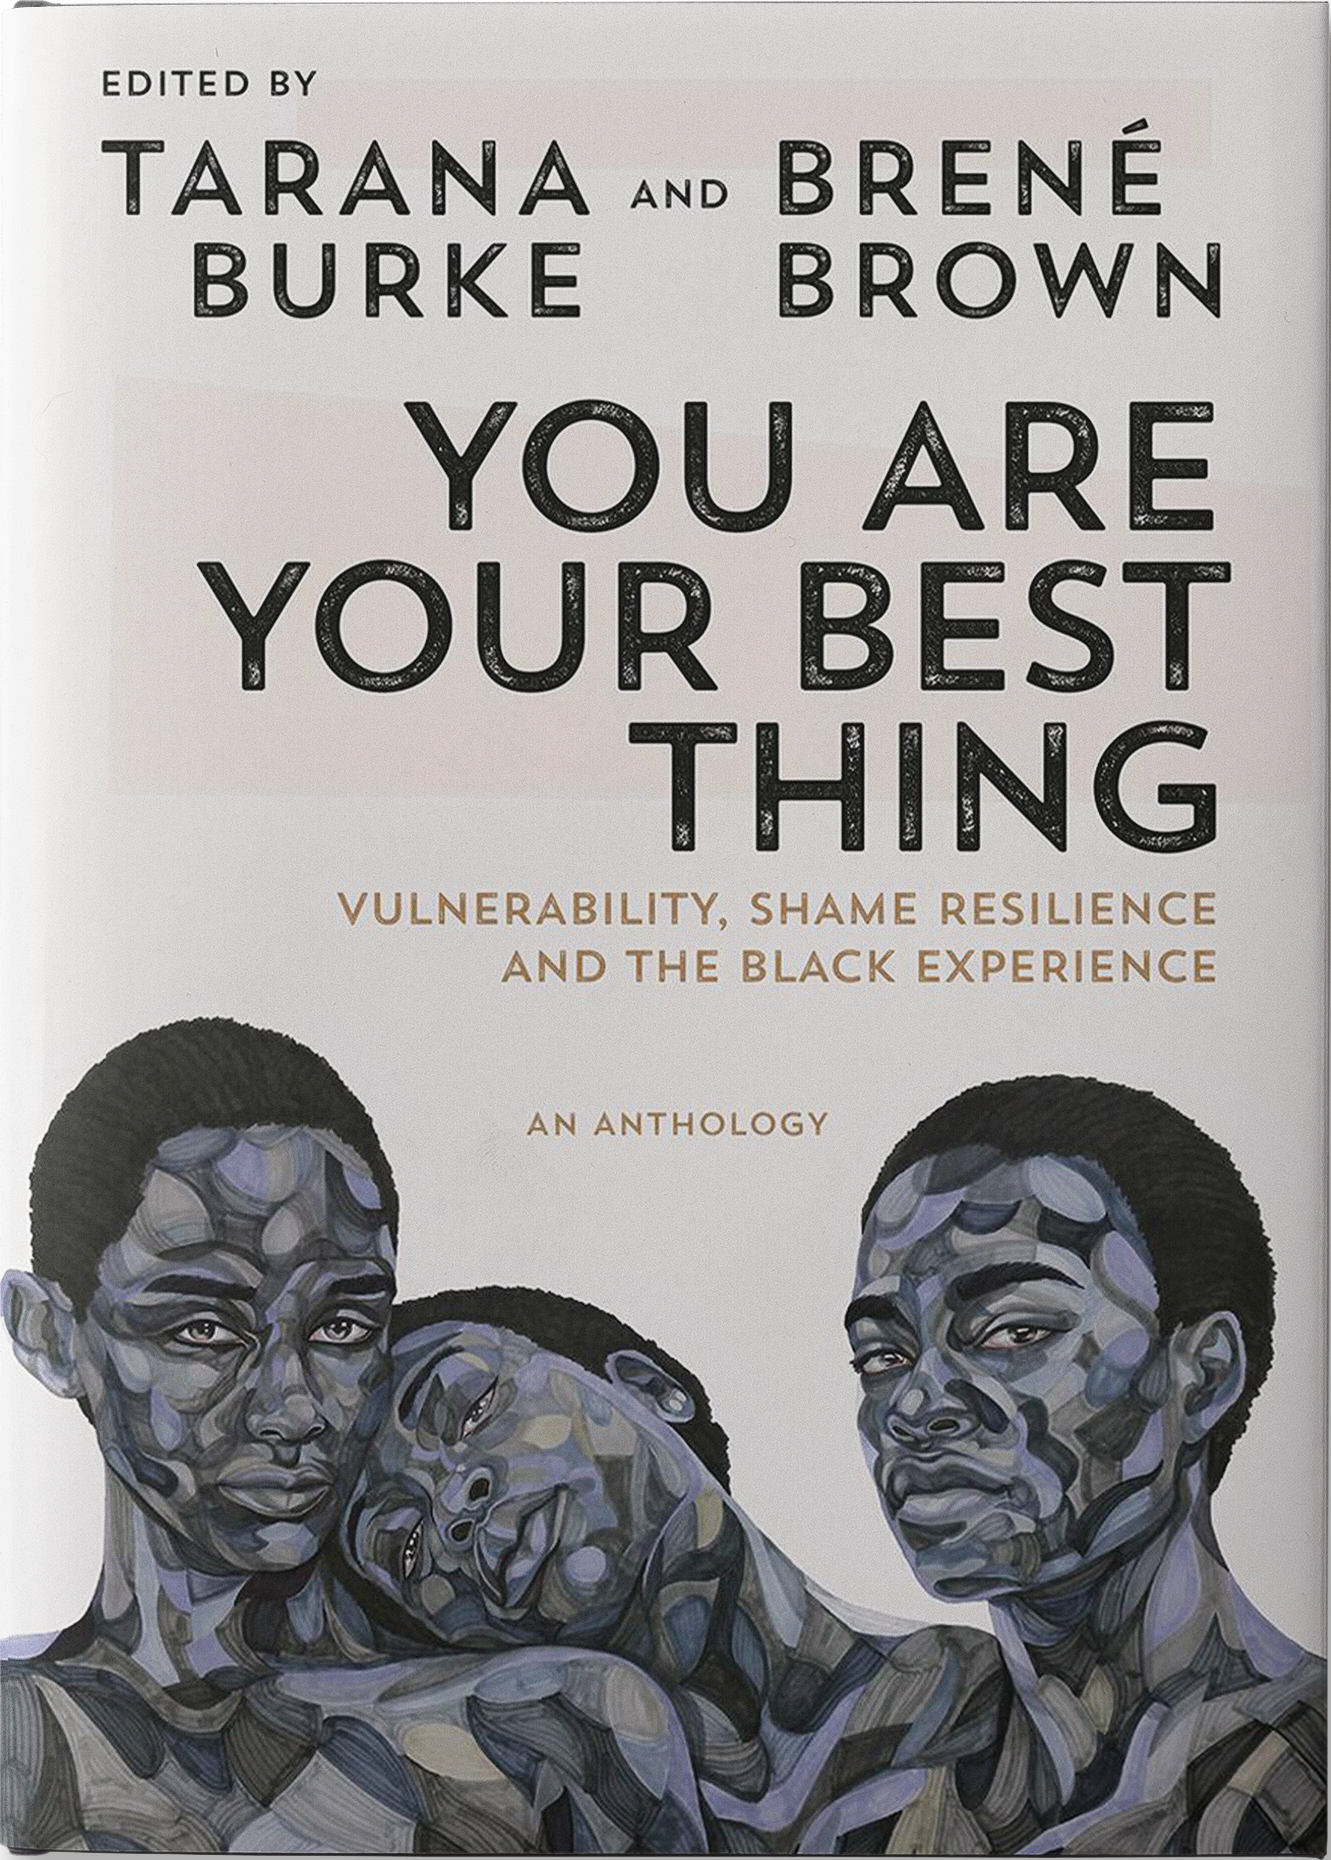 You Are Your Best Thing edited by Tarana Burke and Brene Brown